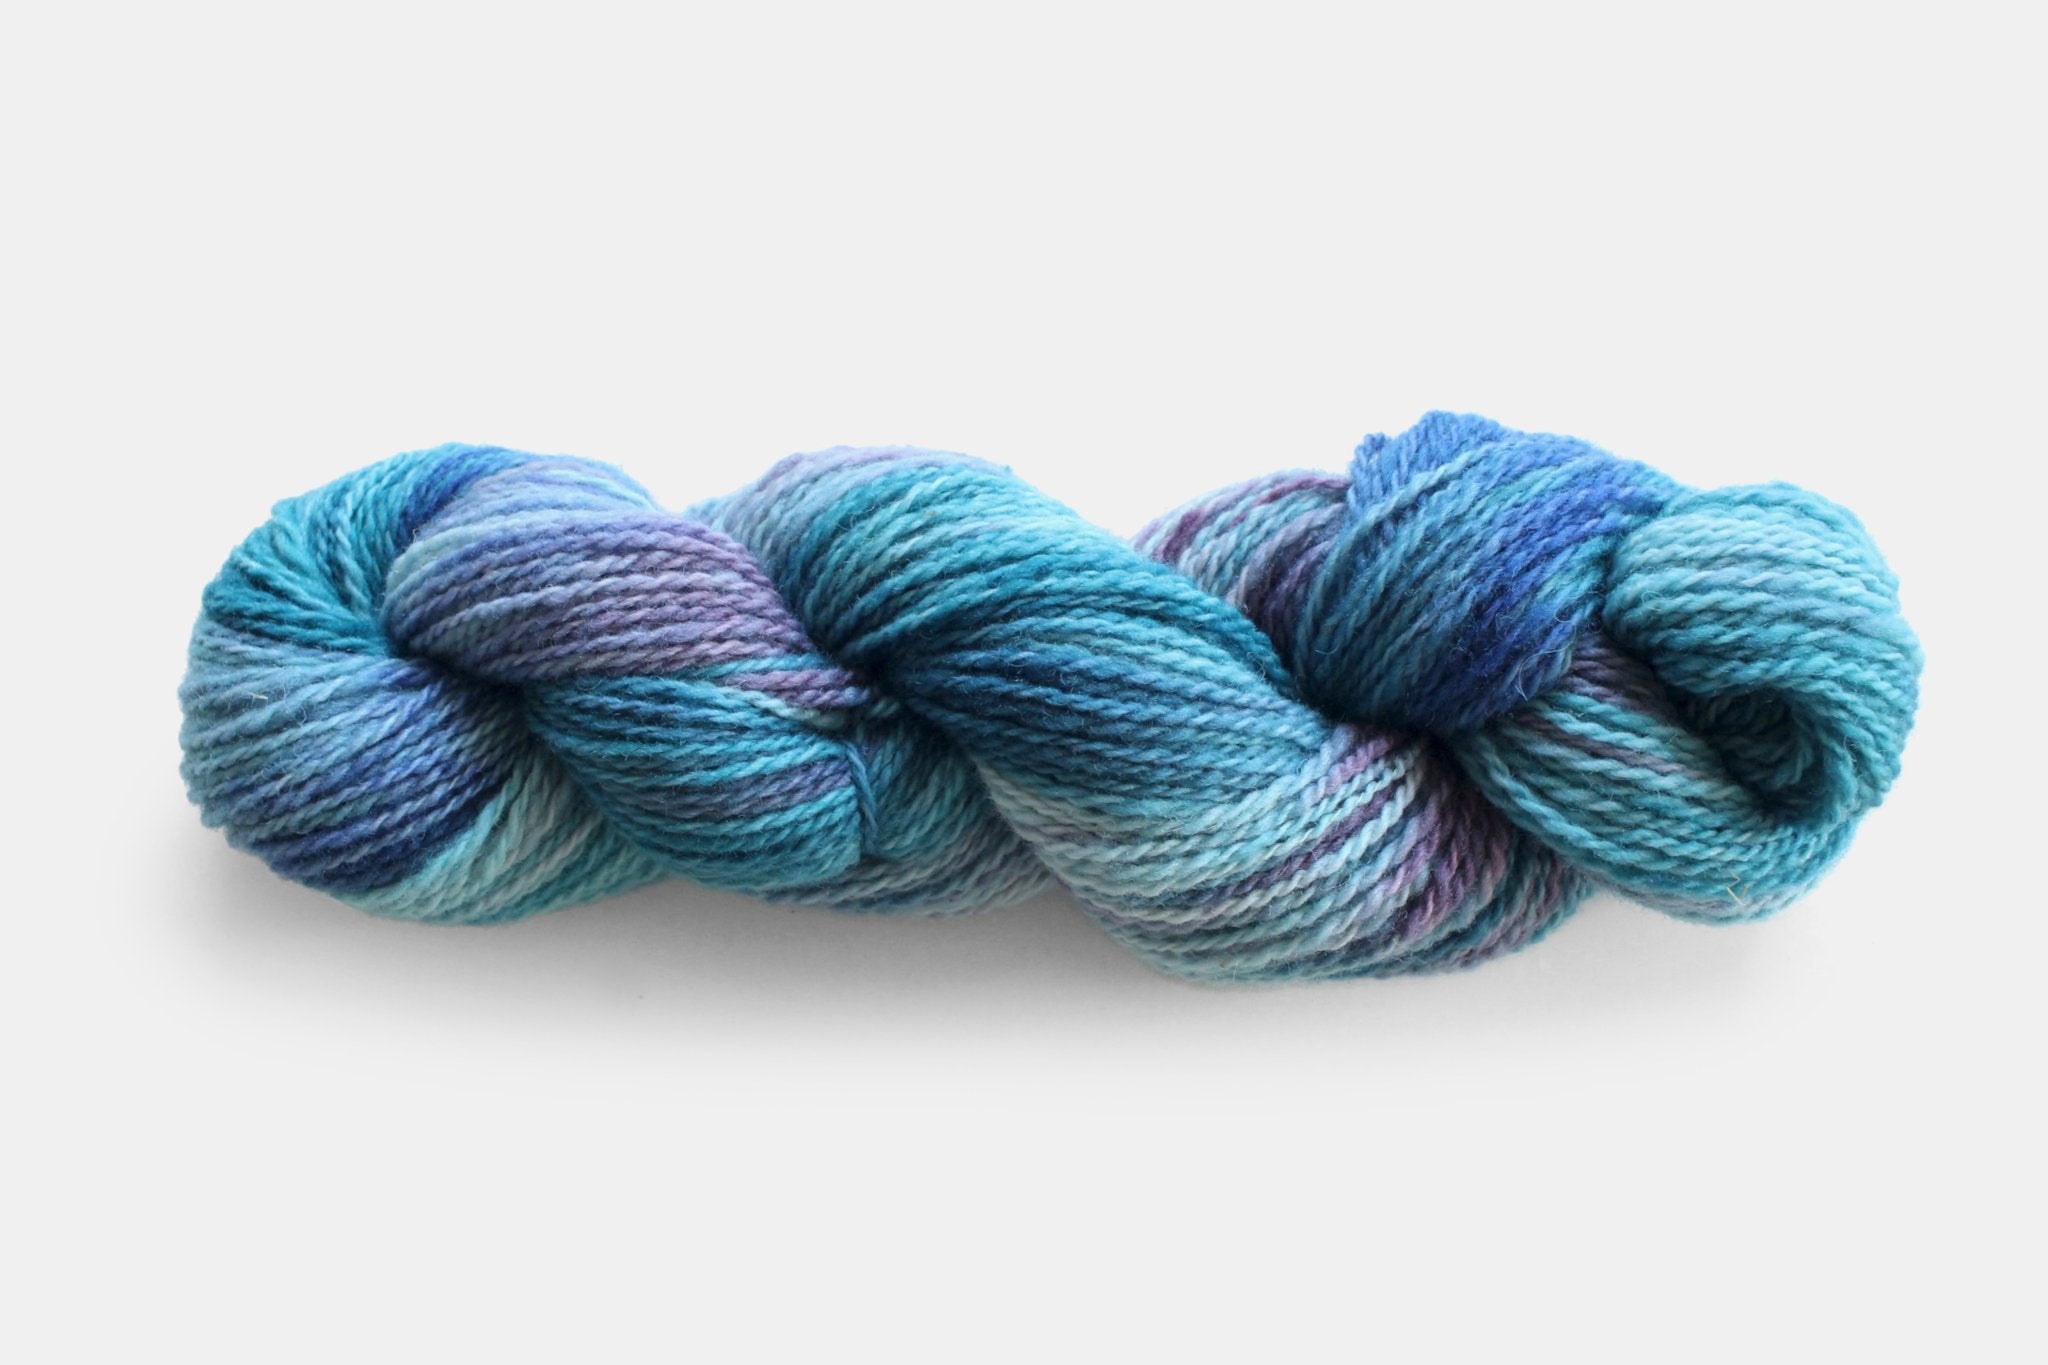 Fleece and Harmony Selkirk Worsted in Blue Poppy